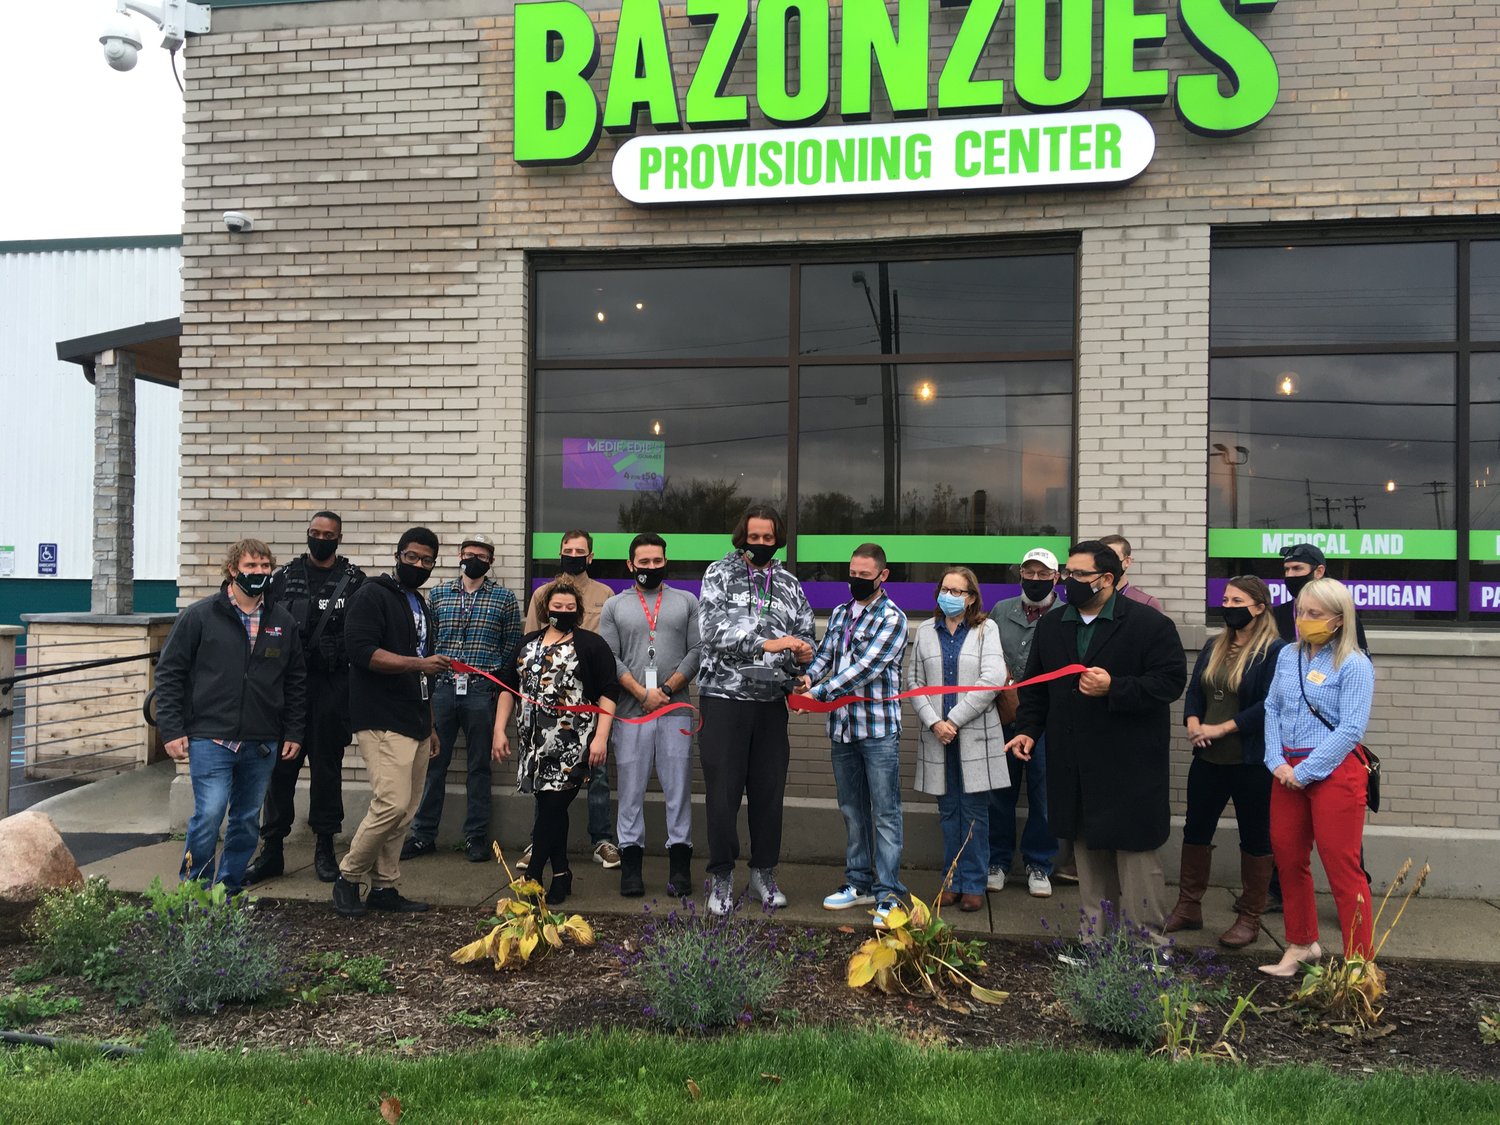 Employees of Bazonzoes Provisioning Center at 2101 W. Willow Highway in Lansing celebrated the business opening with a ribbon cutting today.